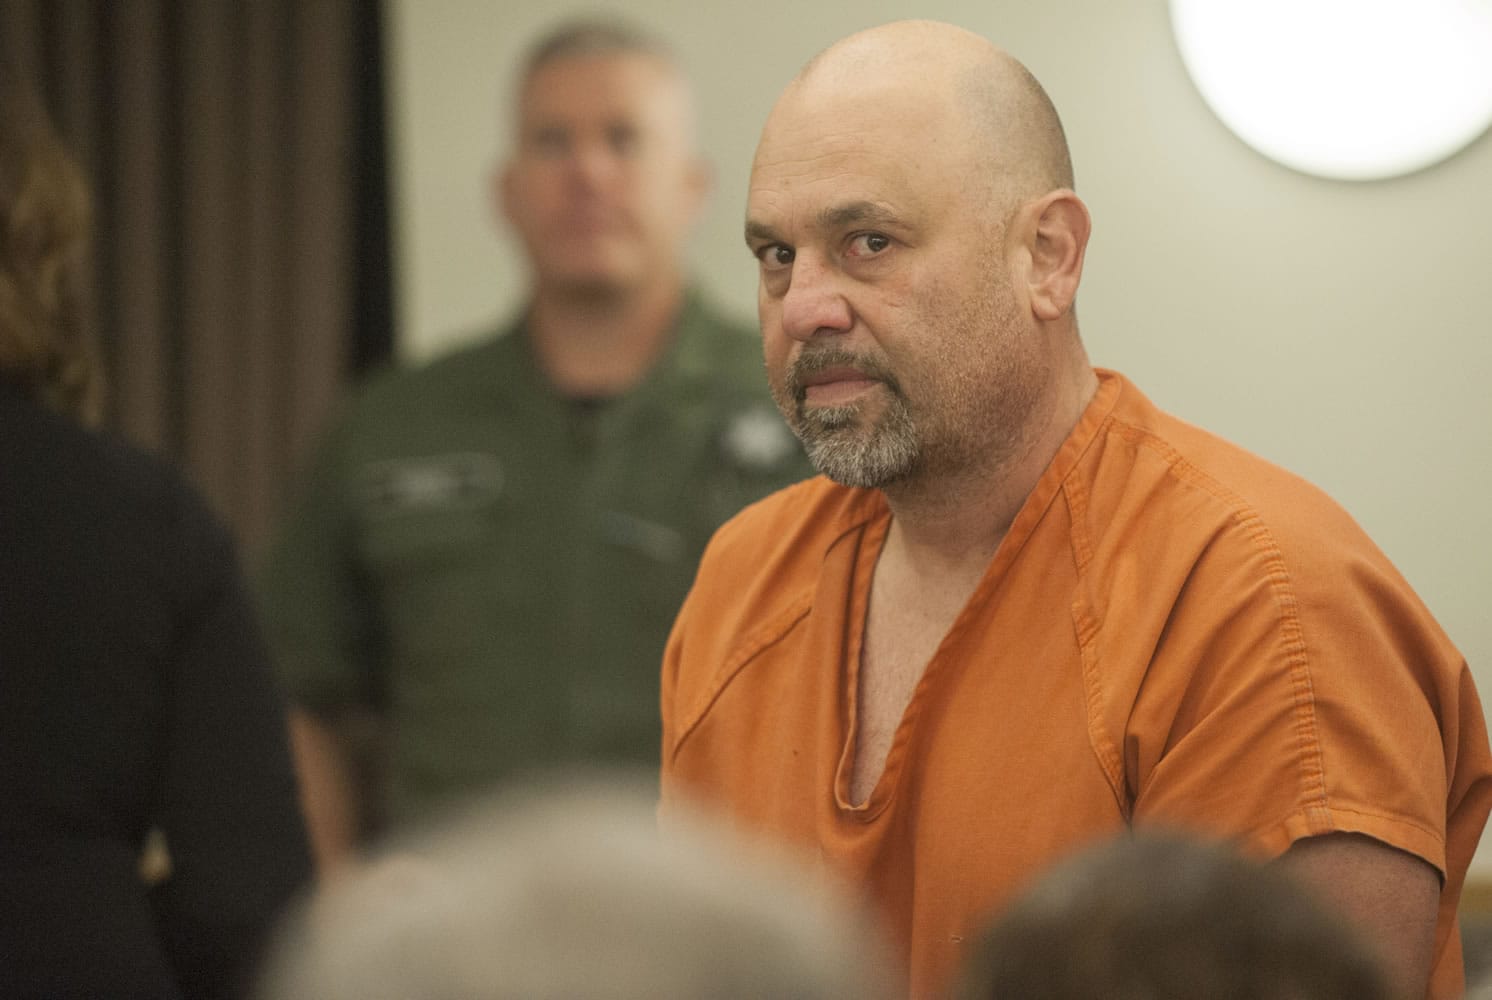 Michael A. Conley, 49, makes a first appearance Monday in Clark County Superior Court in connection with a stabbing Thursday night. A man was dropped off at a hospital with life-threatening stab wounds.